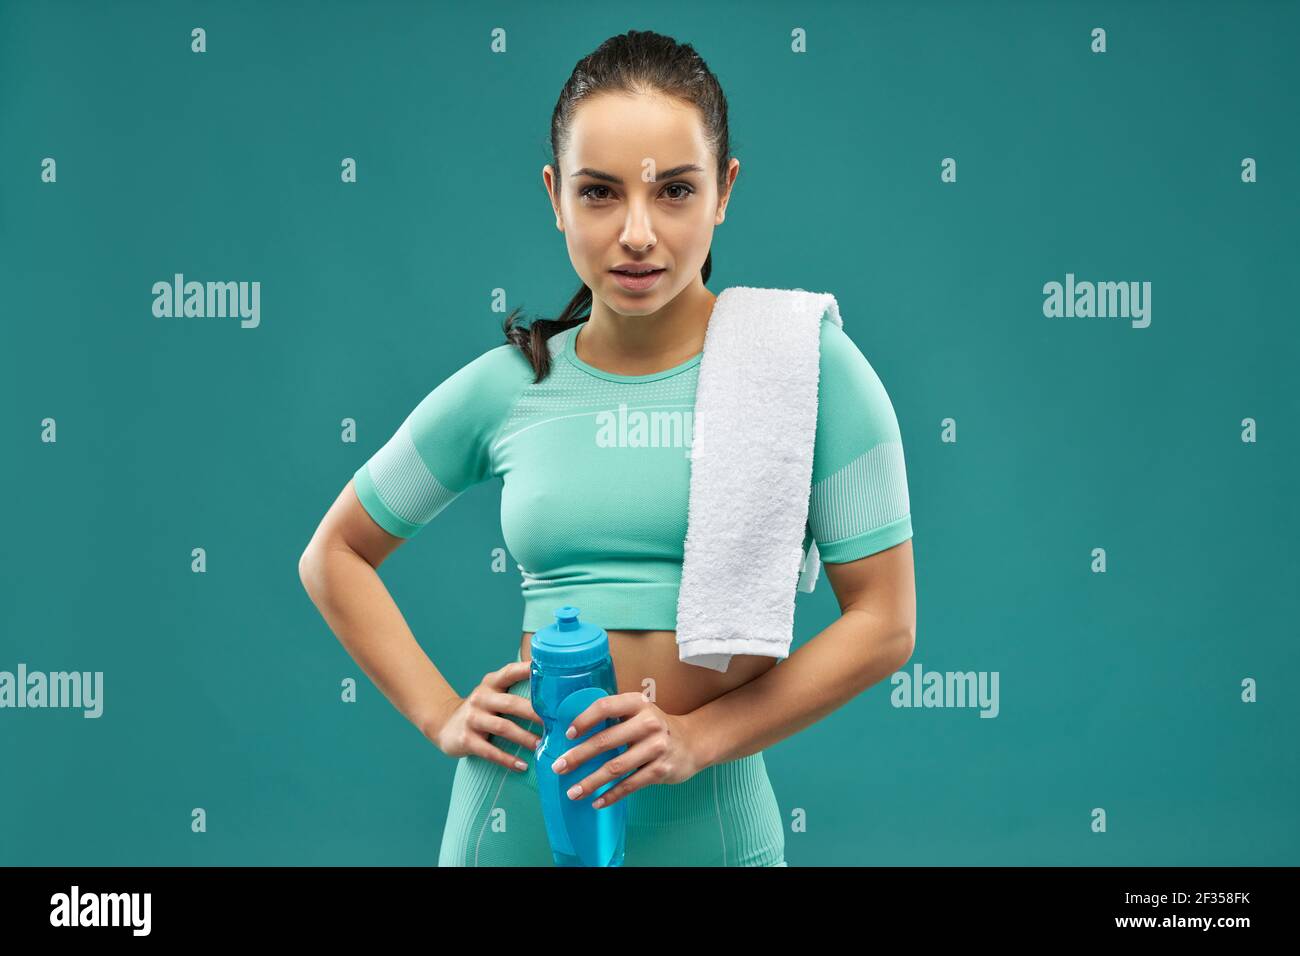 Charming young woman in sportswear holding bottle of water Stock Photo